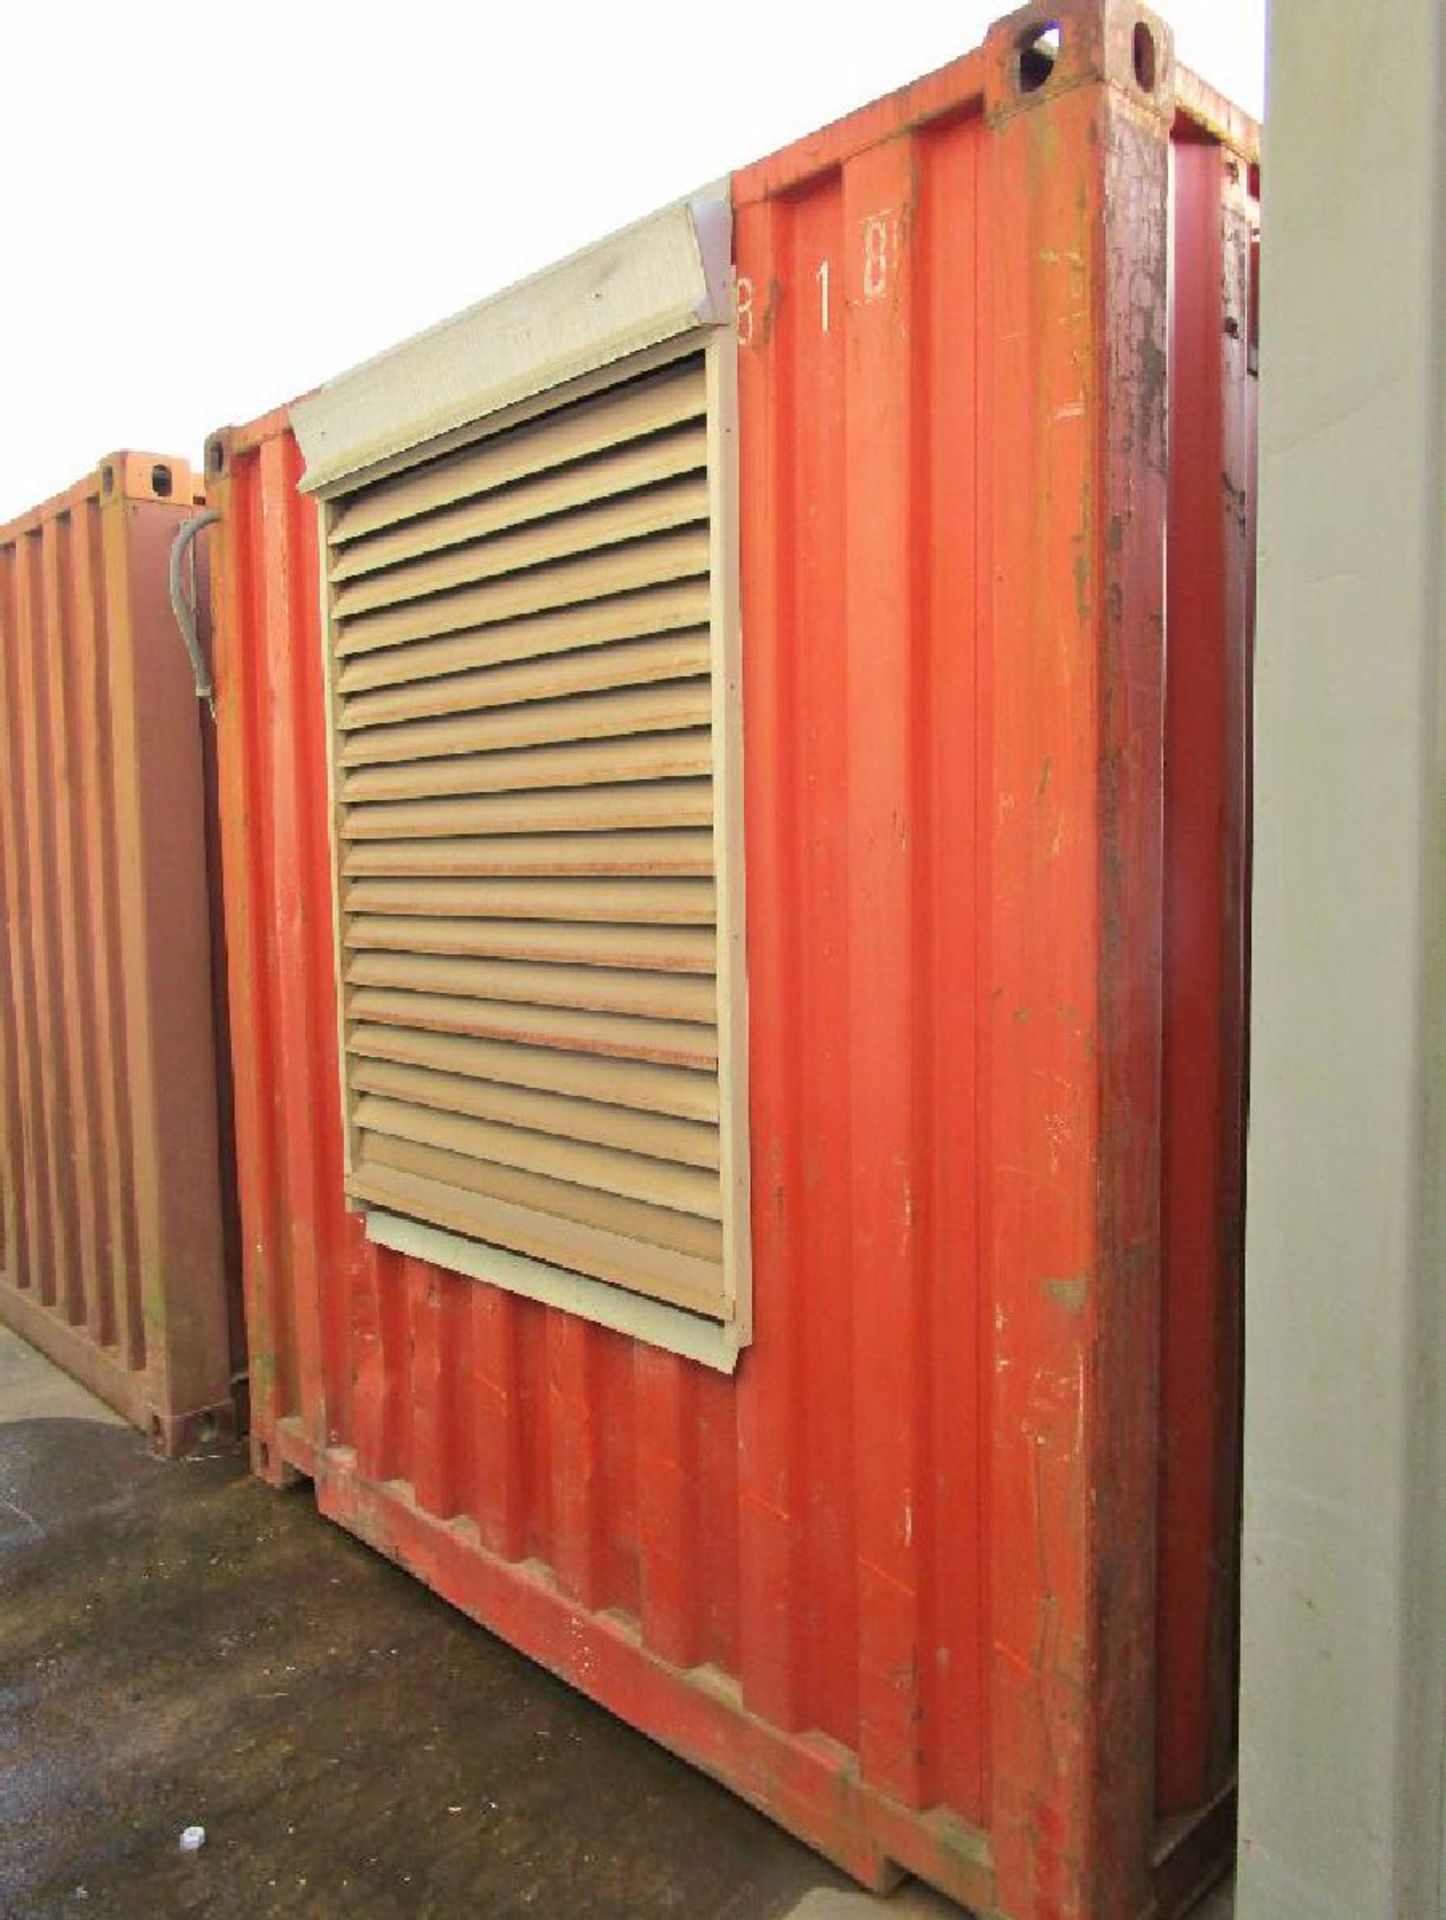 Oversea Shipping Container - Image 2 of 10